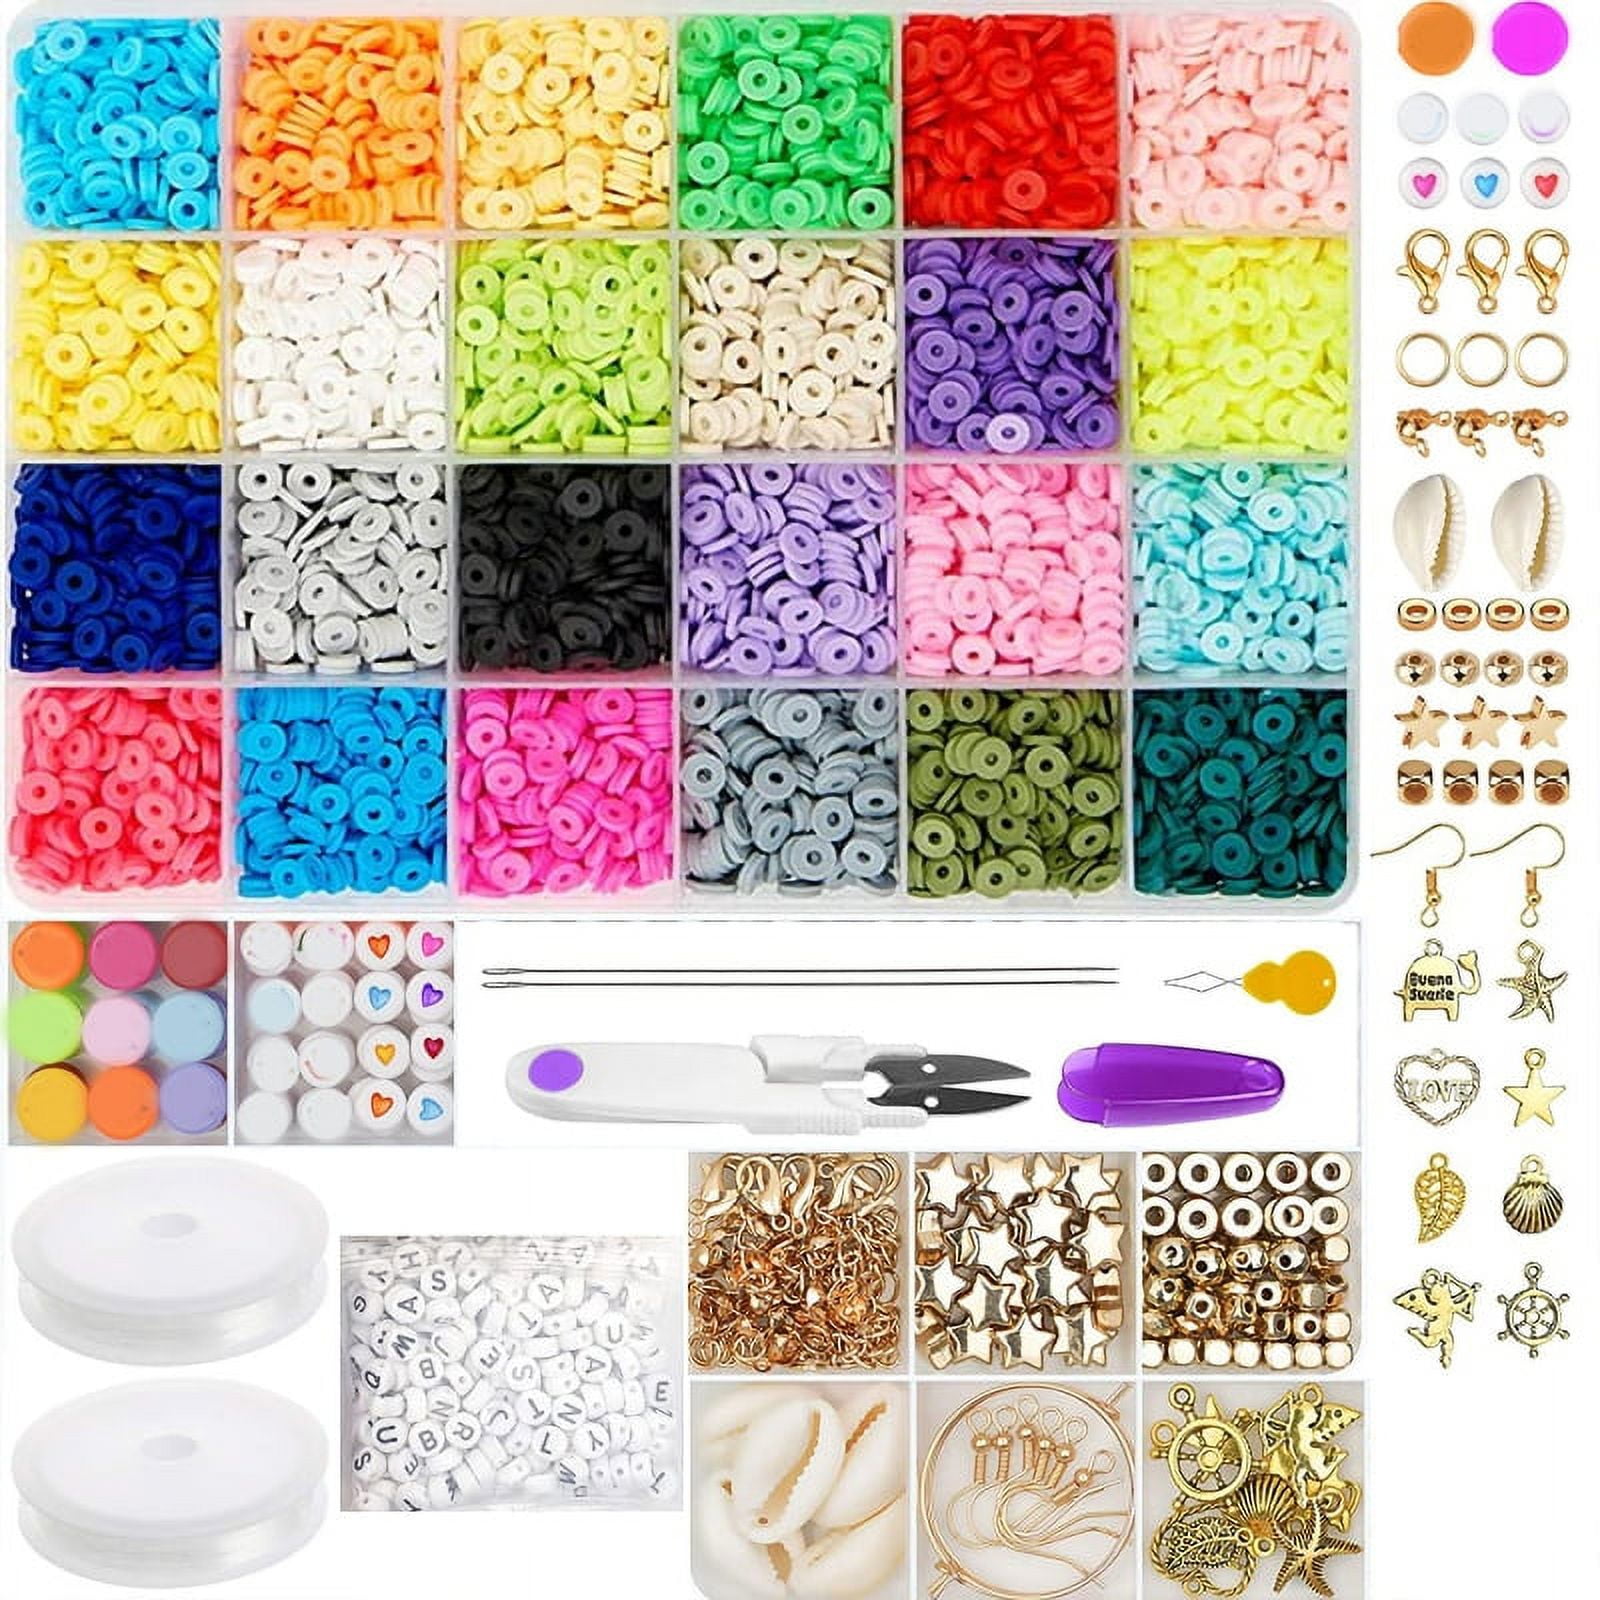 UcaseArt 4900 Pcs Clay Beads for Bracelets Making Kit, Flat Round Polymer Clay Beads for Jewelry Making Kit with Letter Beads and Smiley Face Beads for